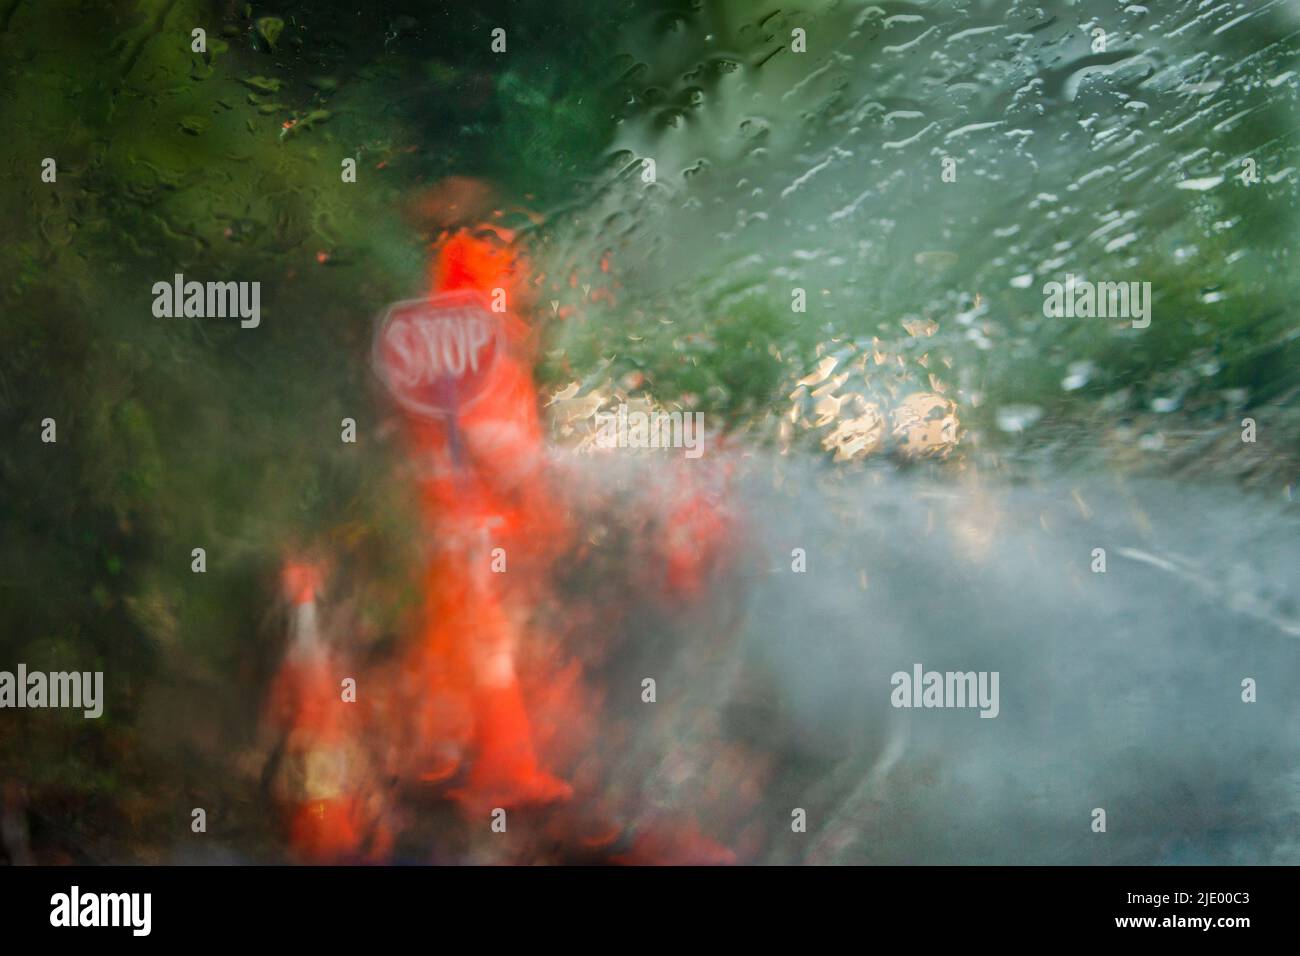 Worker wearing high visibility orange clothing with Stop sign in the heavy rain. Photo taken using intentional camera movement behind rain spattered c Stock Photo